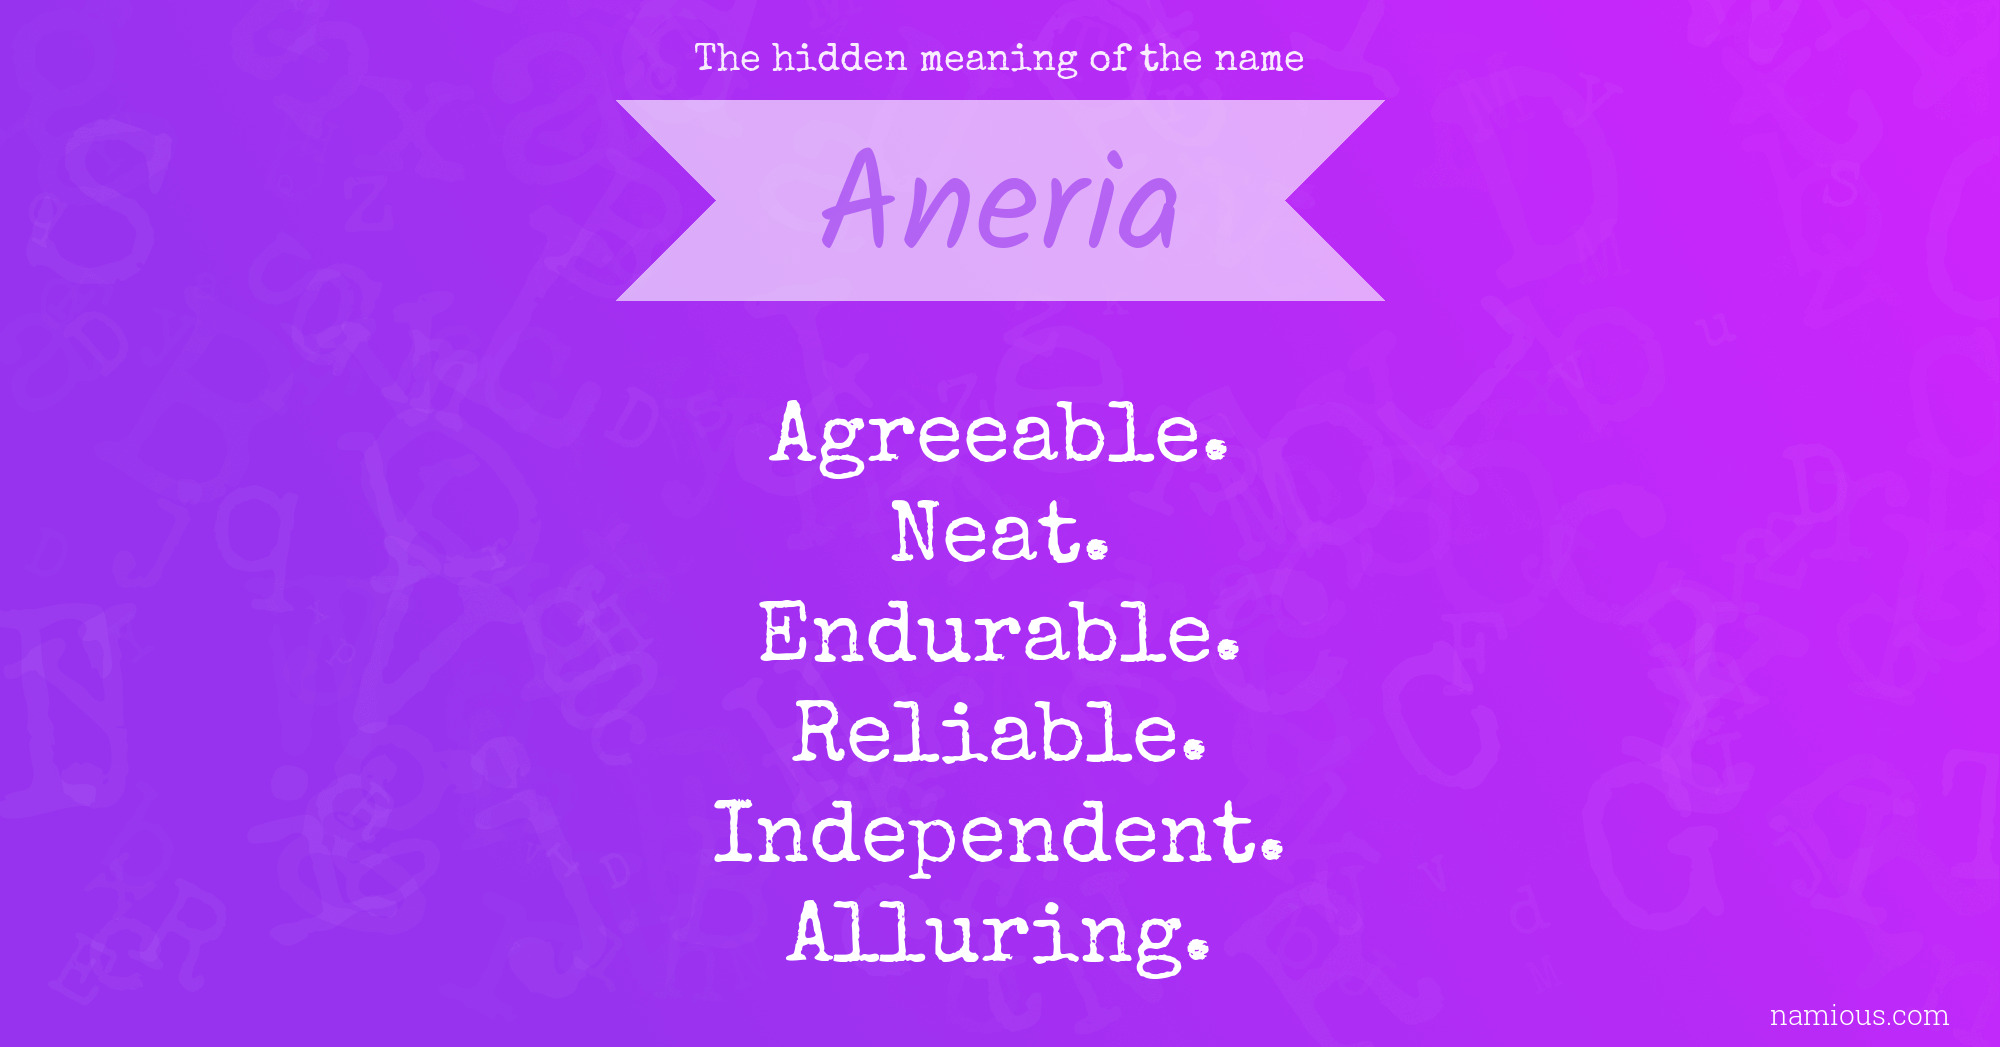 The hidden meaning of the name Aneria